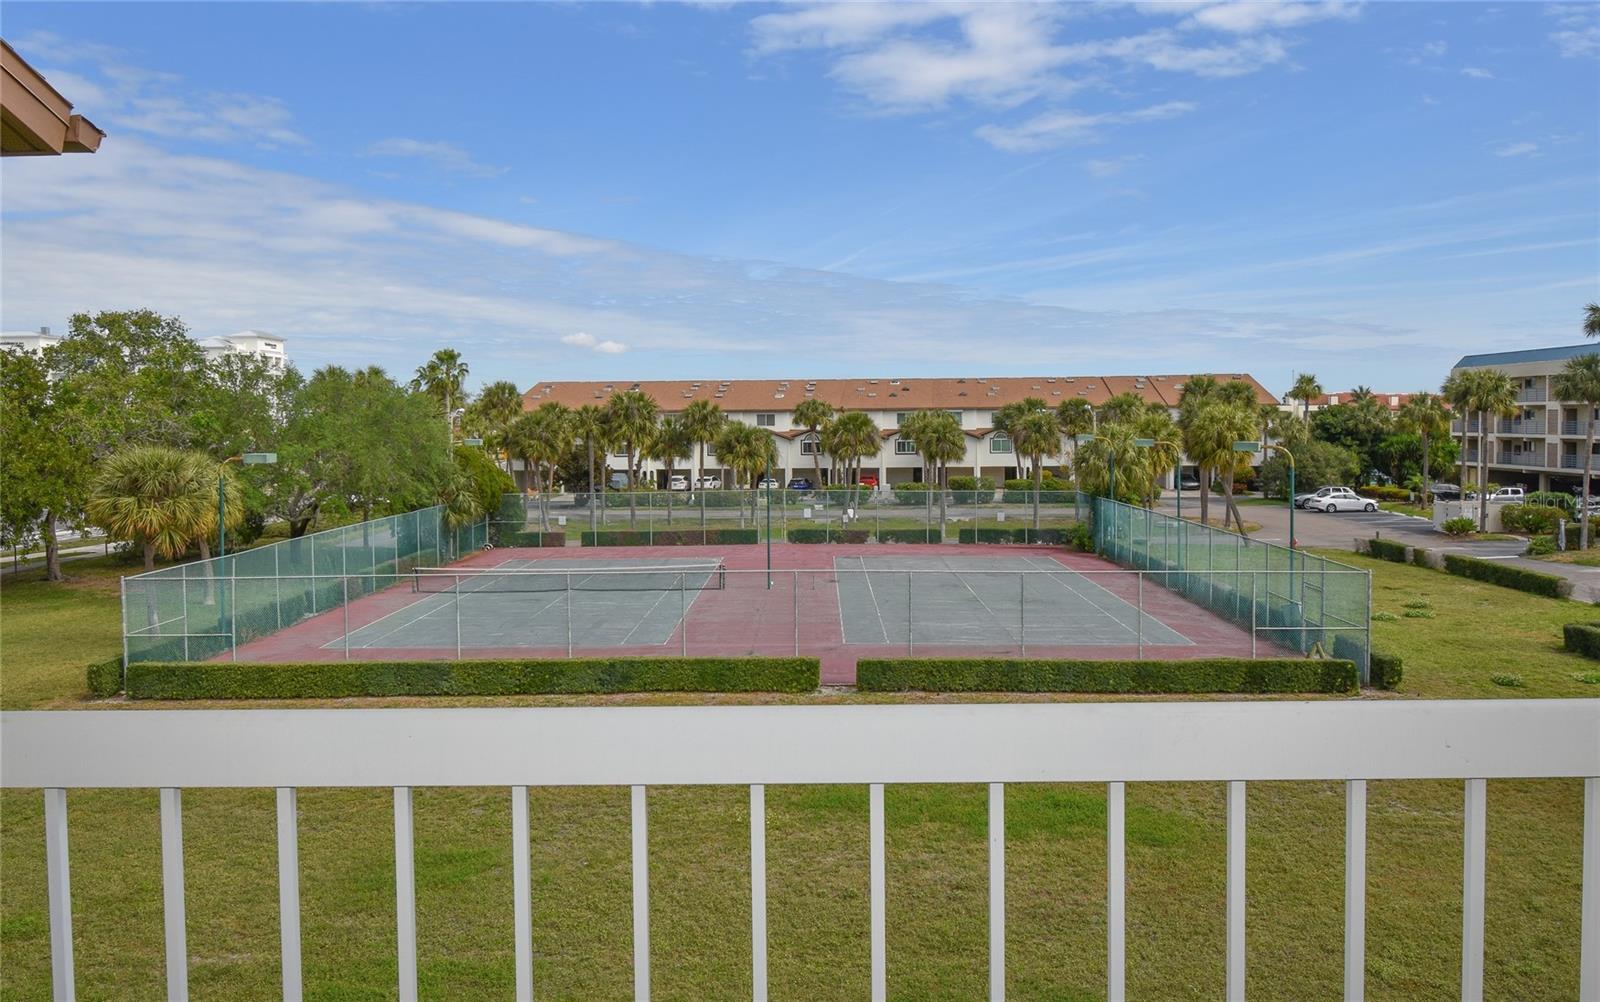 View from Balcony- overlooking the tennis courts